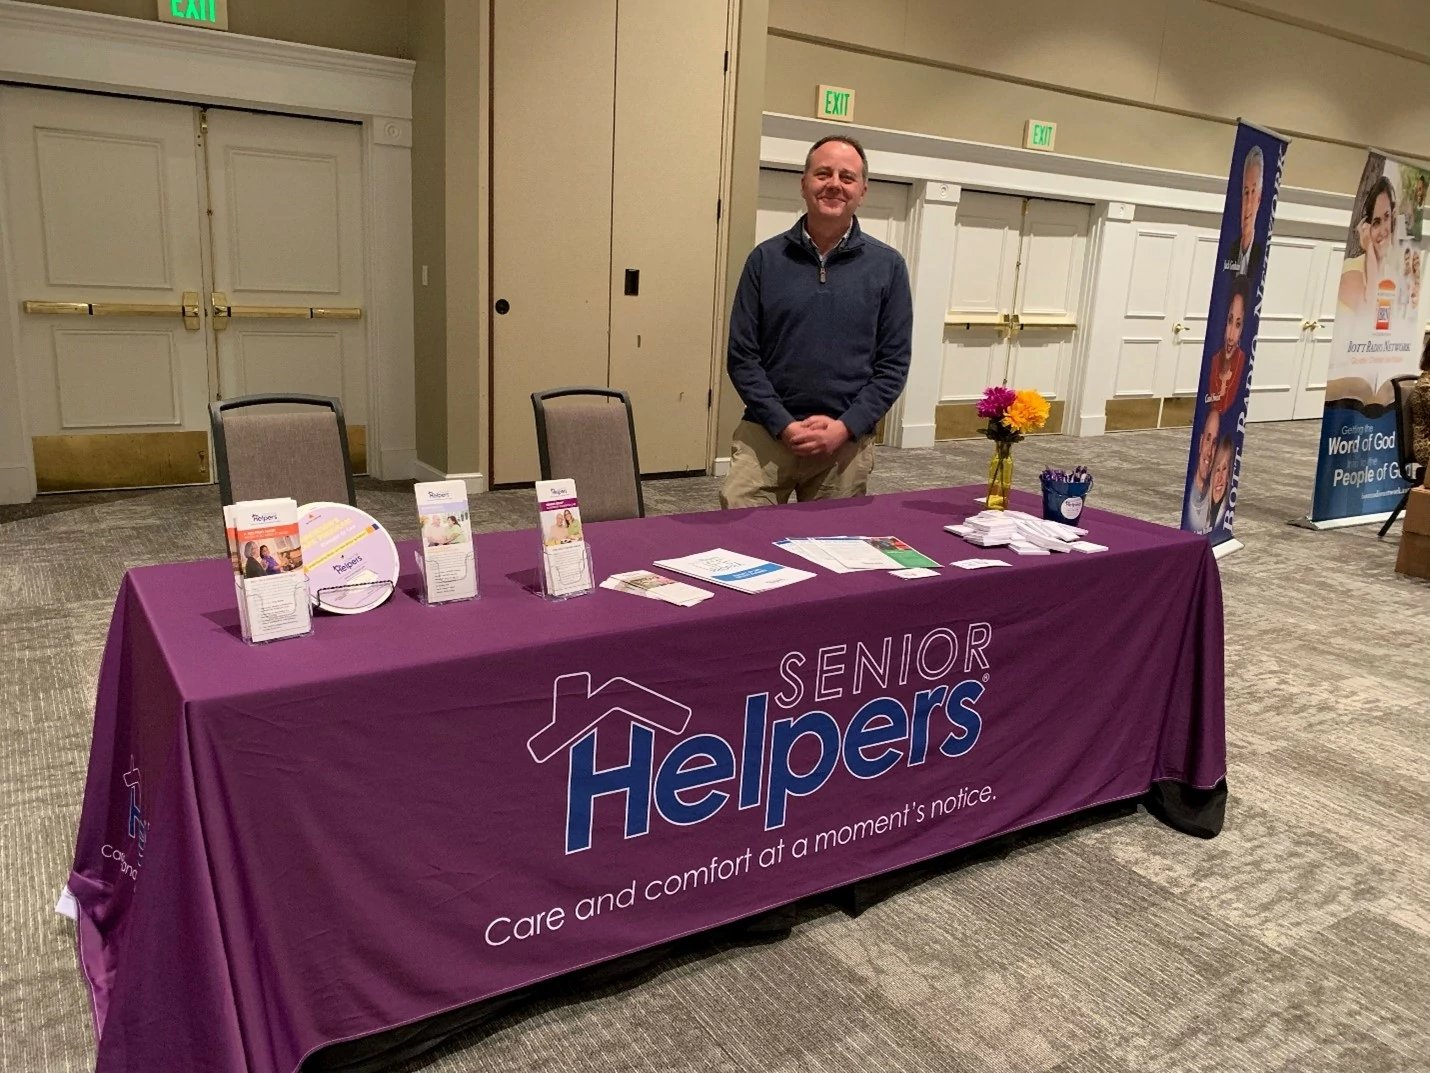 Rod Marter enjoyed discussing Senior Helpers with area Pastors at the Pastor Appreciation Luncheon hosted by Bott Radio. It was a great day for fellowship and listening to keynote speaker, David Burton. Thank you, Bott Radio Network for inviting Senior Helpers Memphis to be a part of this event.